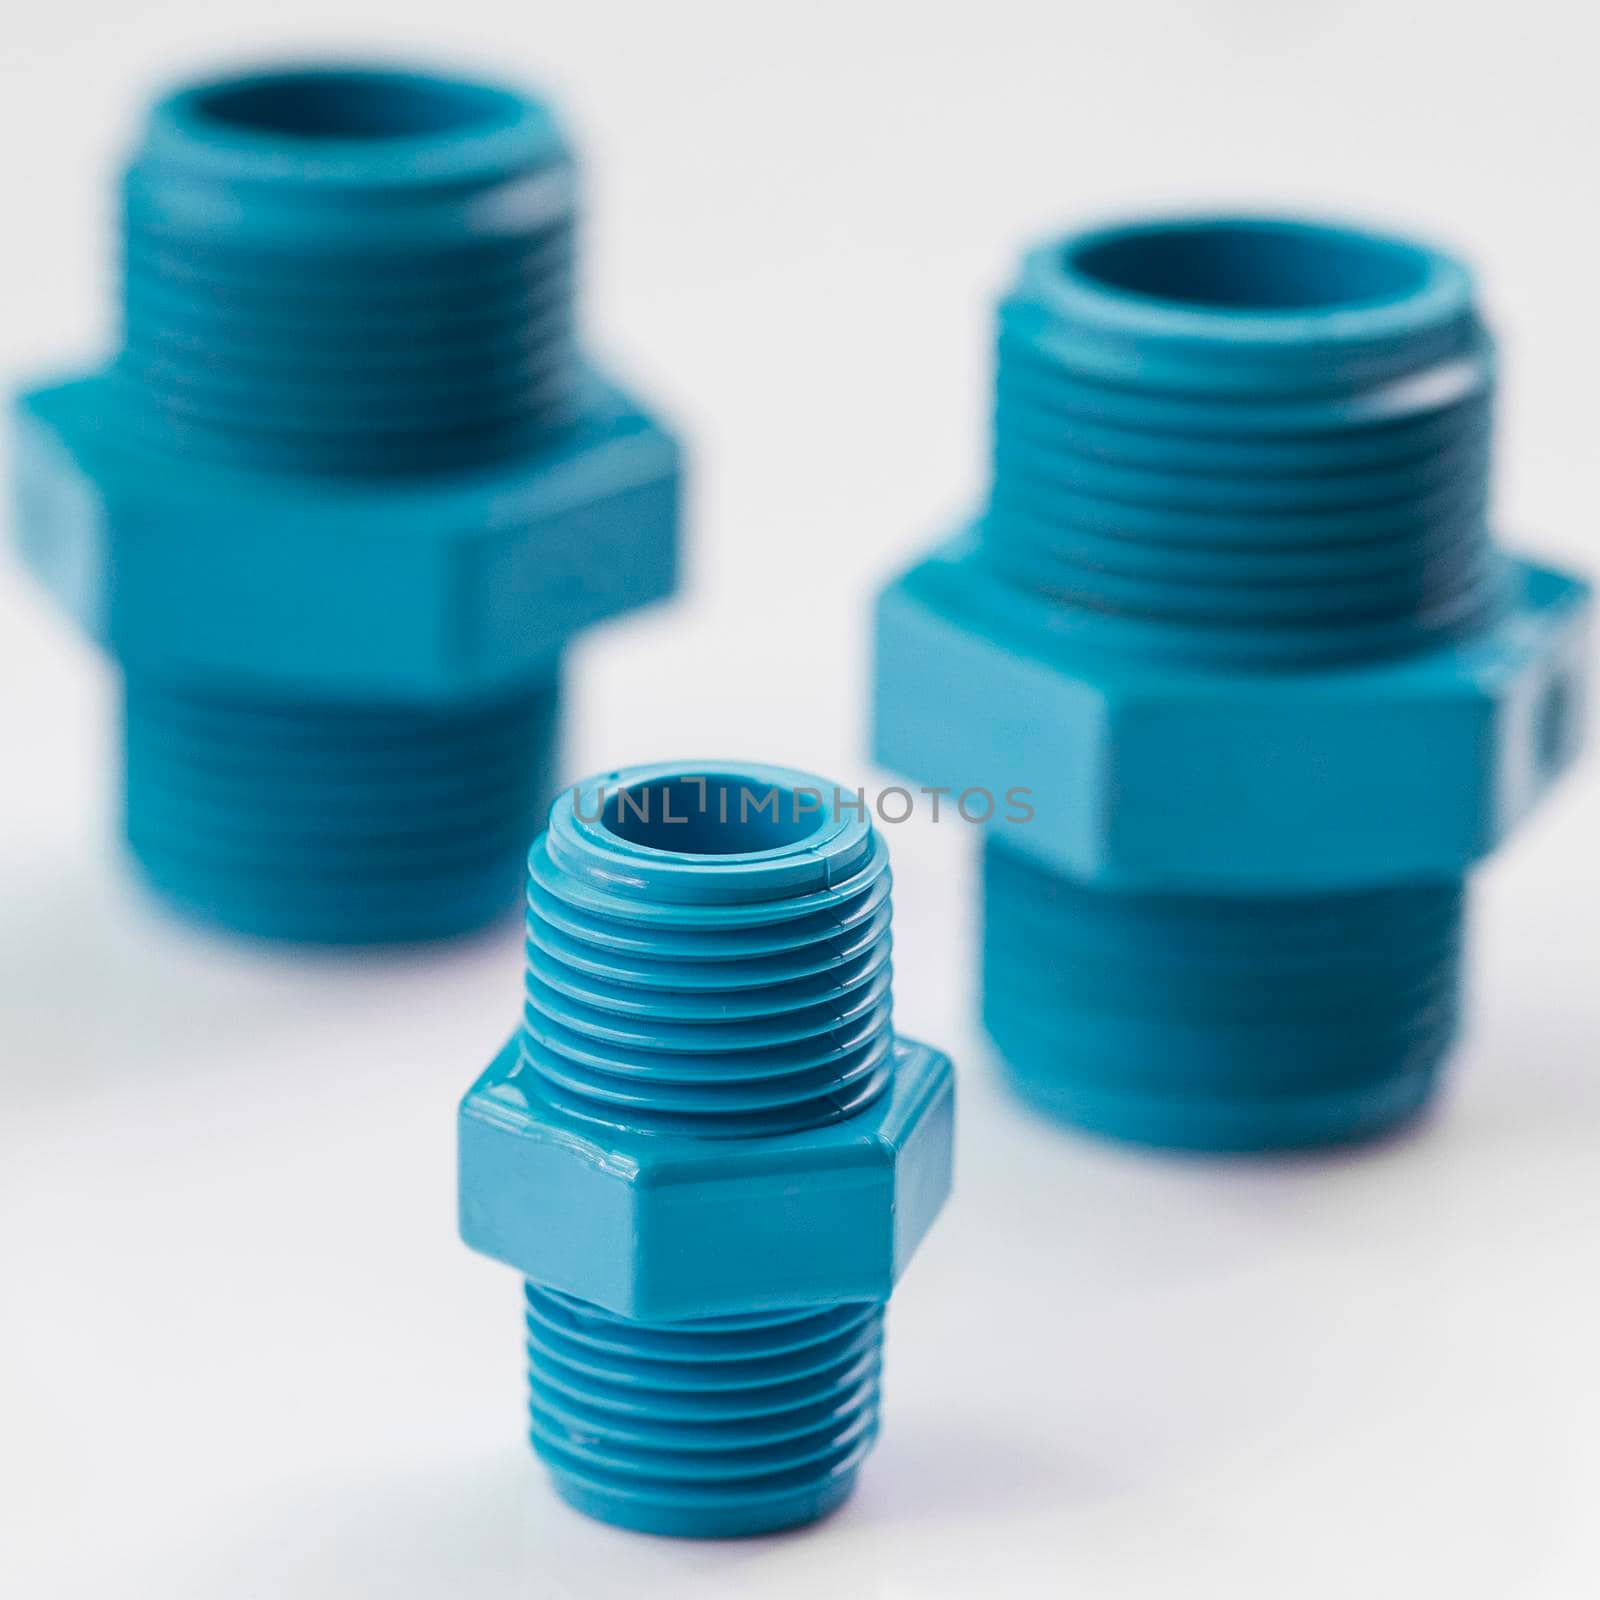 PVC pipe fittings on white background. by titipong